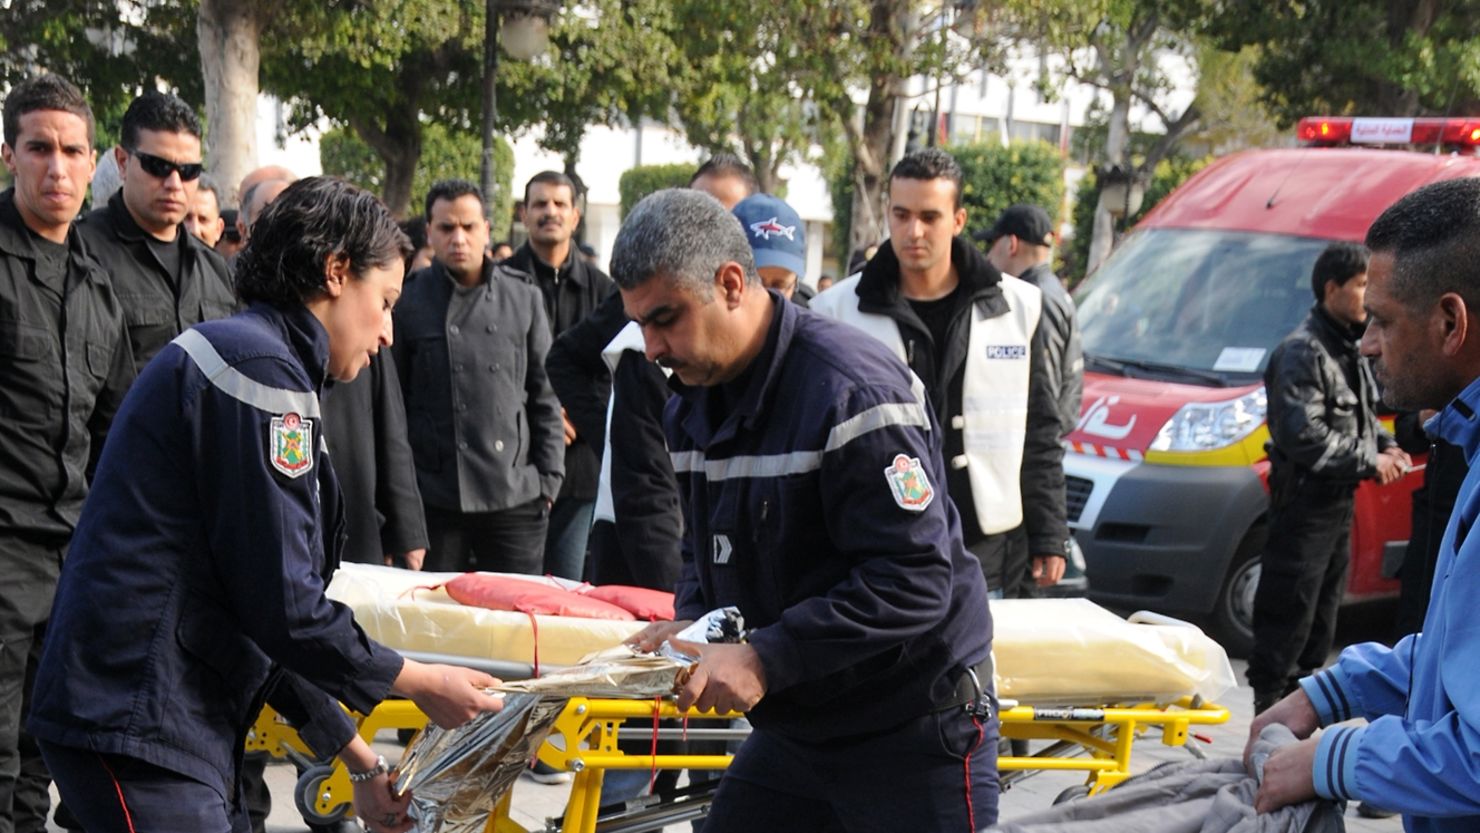 Tunisian paramedics rush to carry Adel Khadri, a cigarette vendor who immolated himself in Tunis on March 12, 2013.